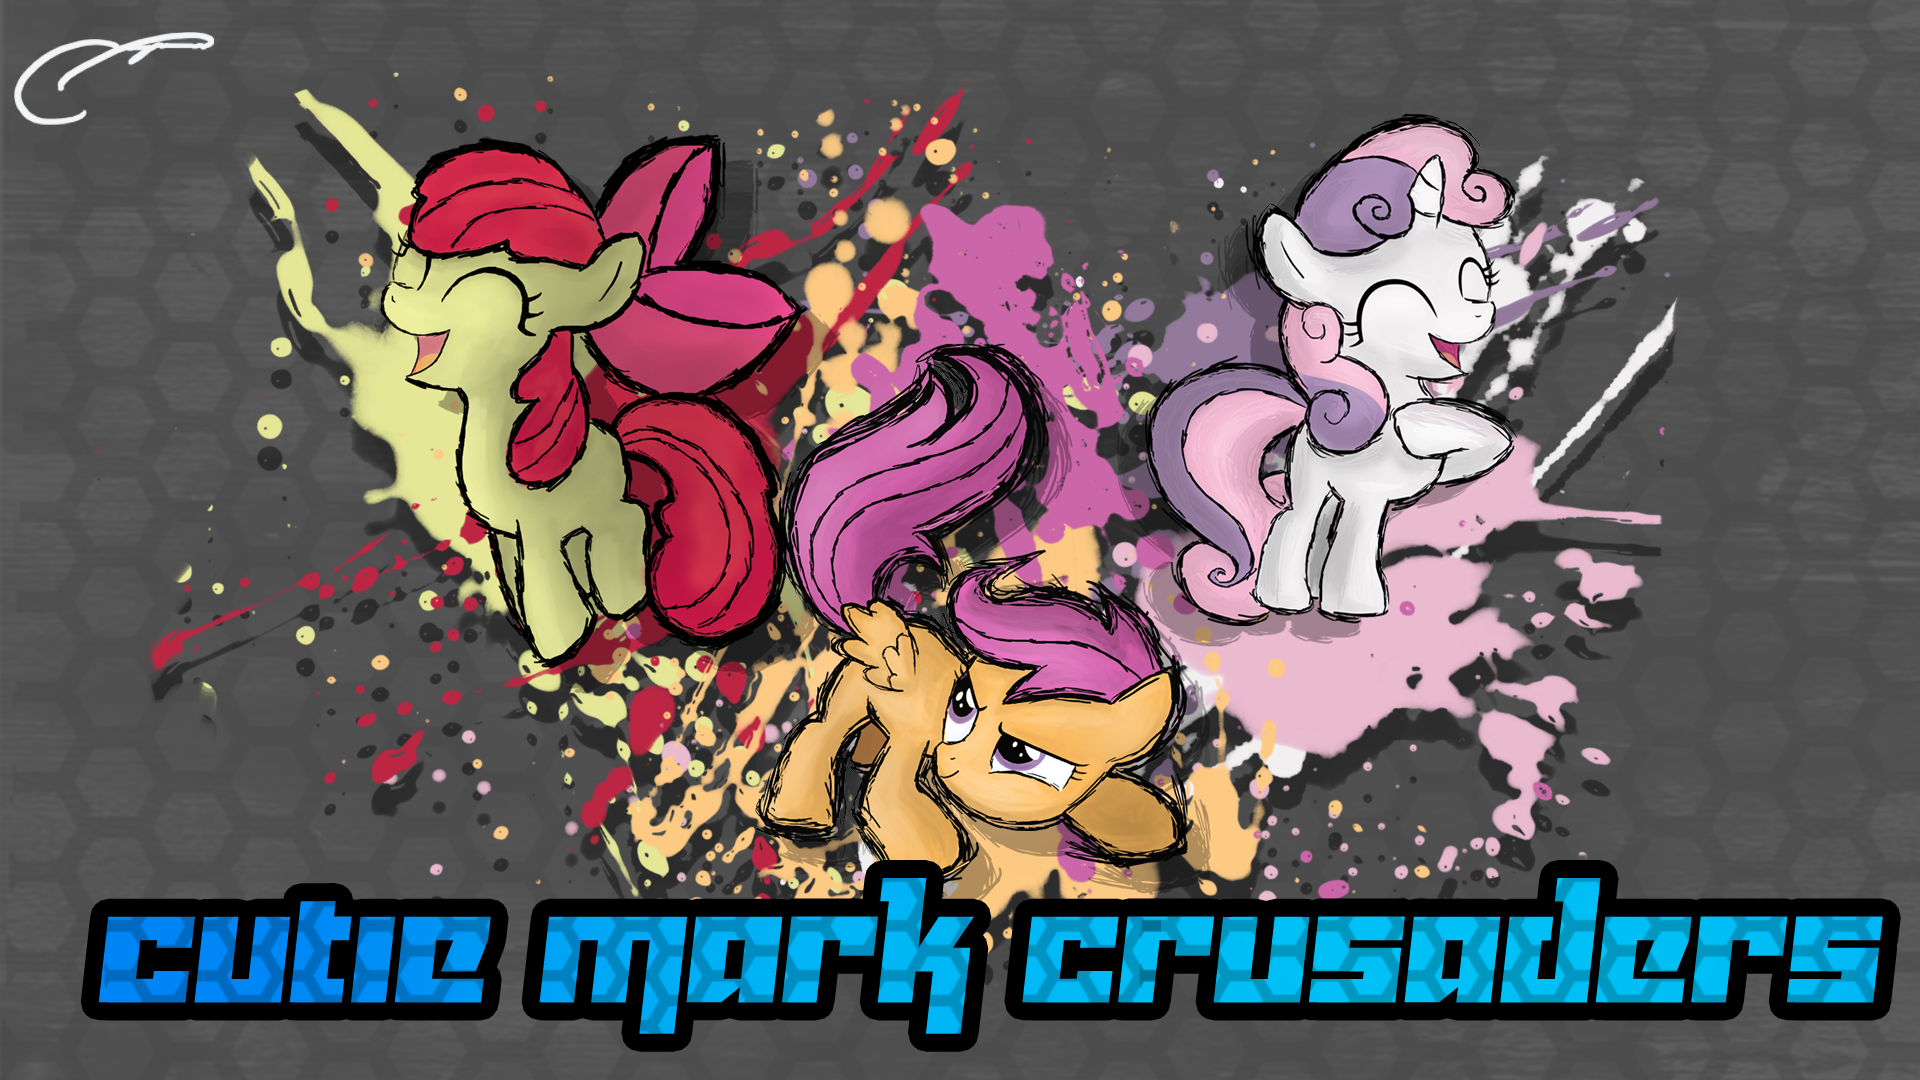 Cutie Mark Crusaders Wallpaper by GhostParadigm, Pangbot, saturtron and Stabzor